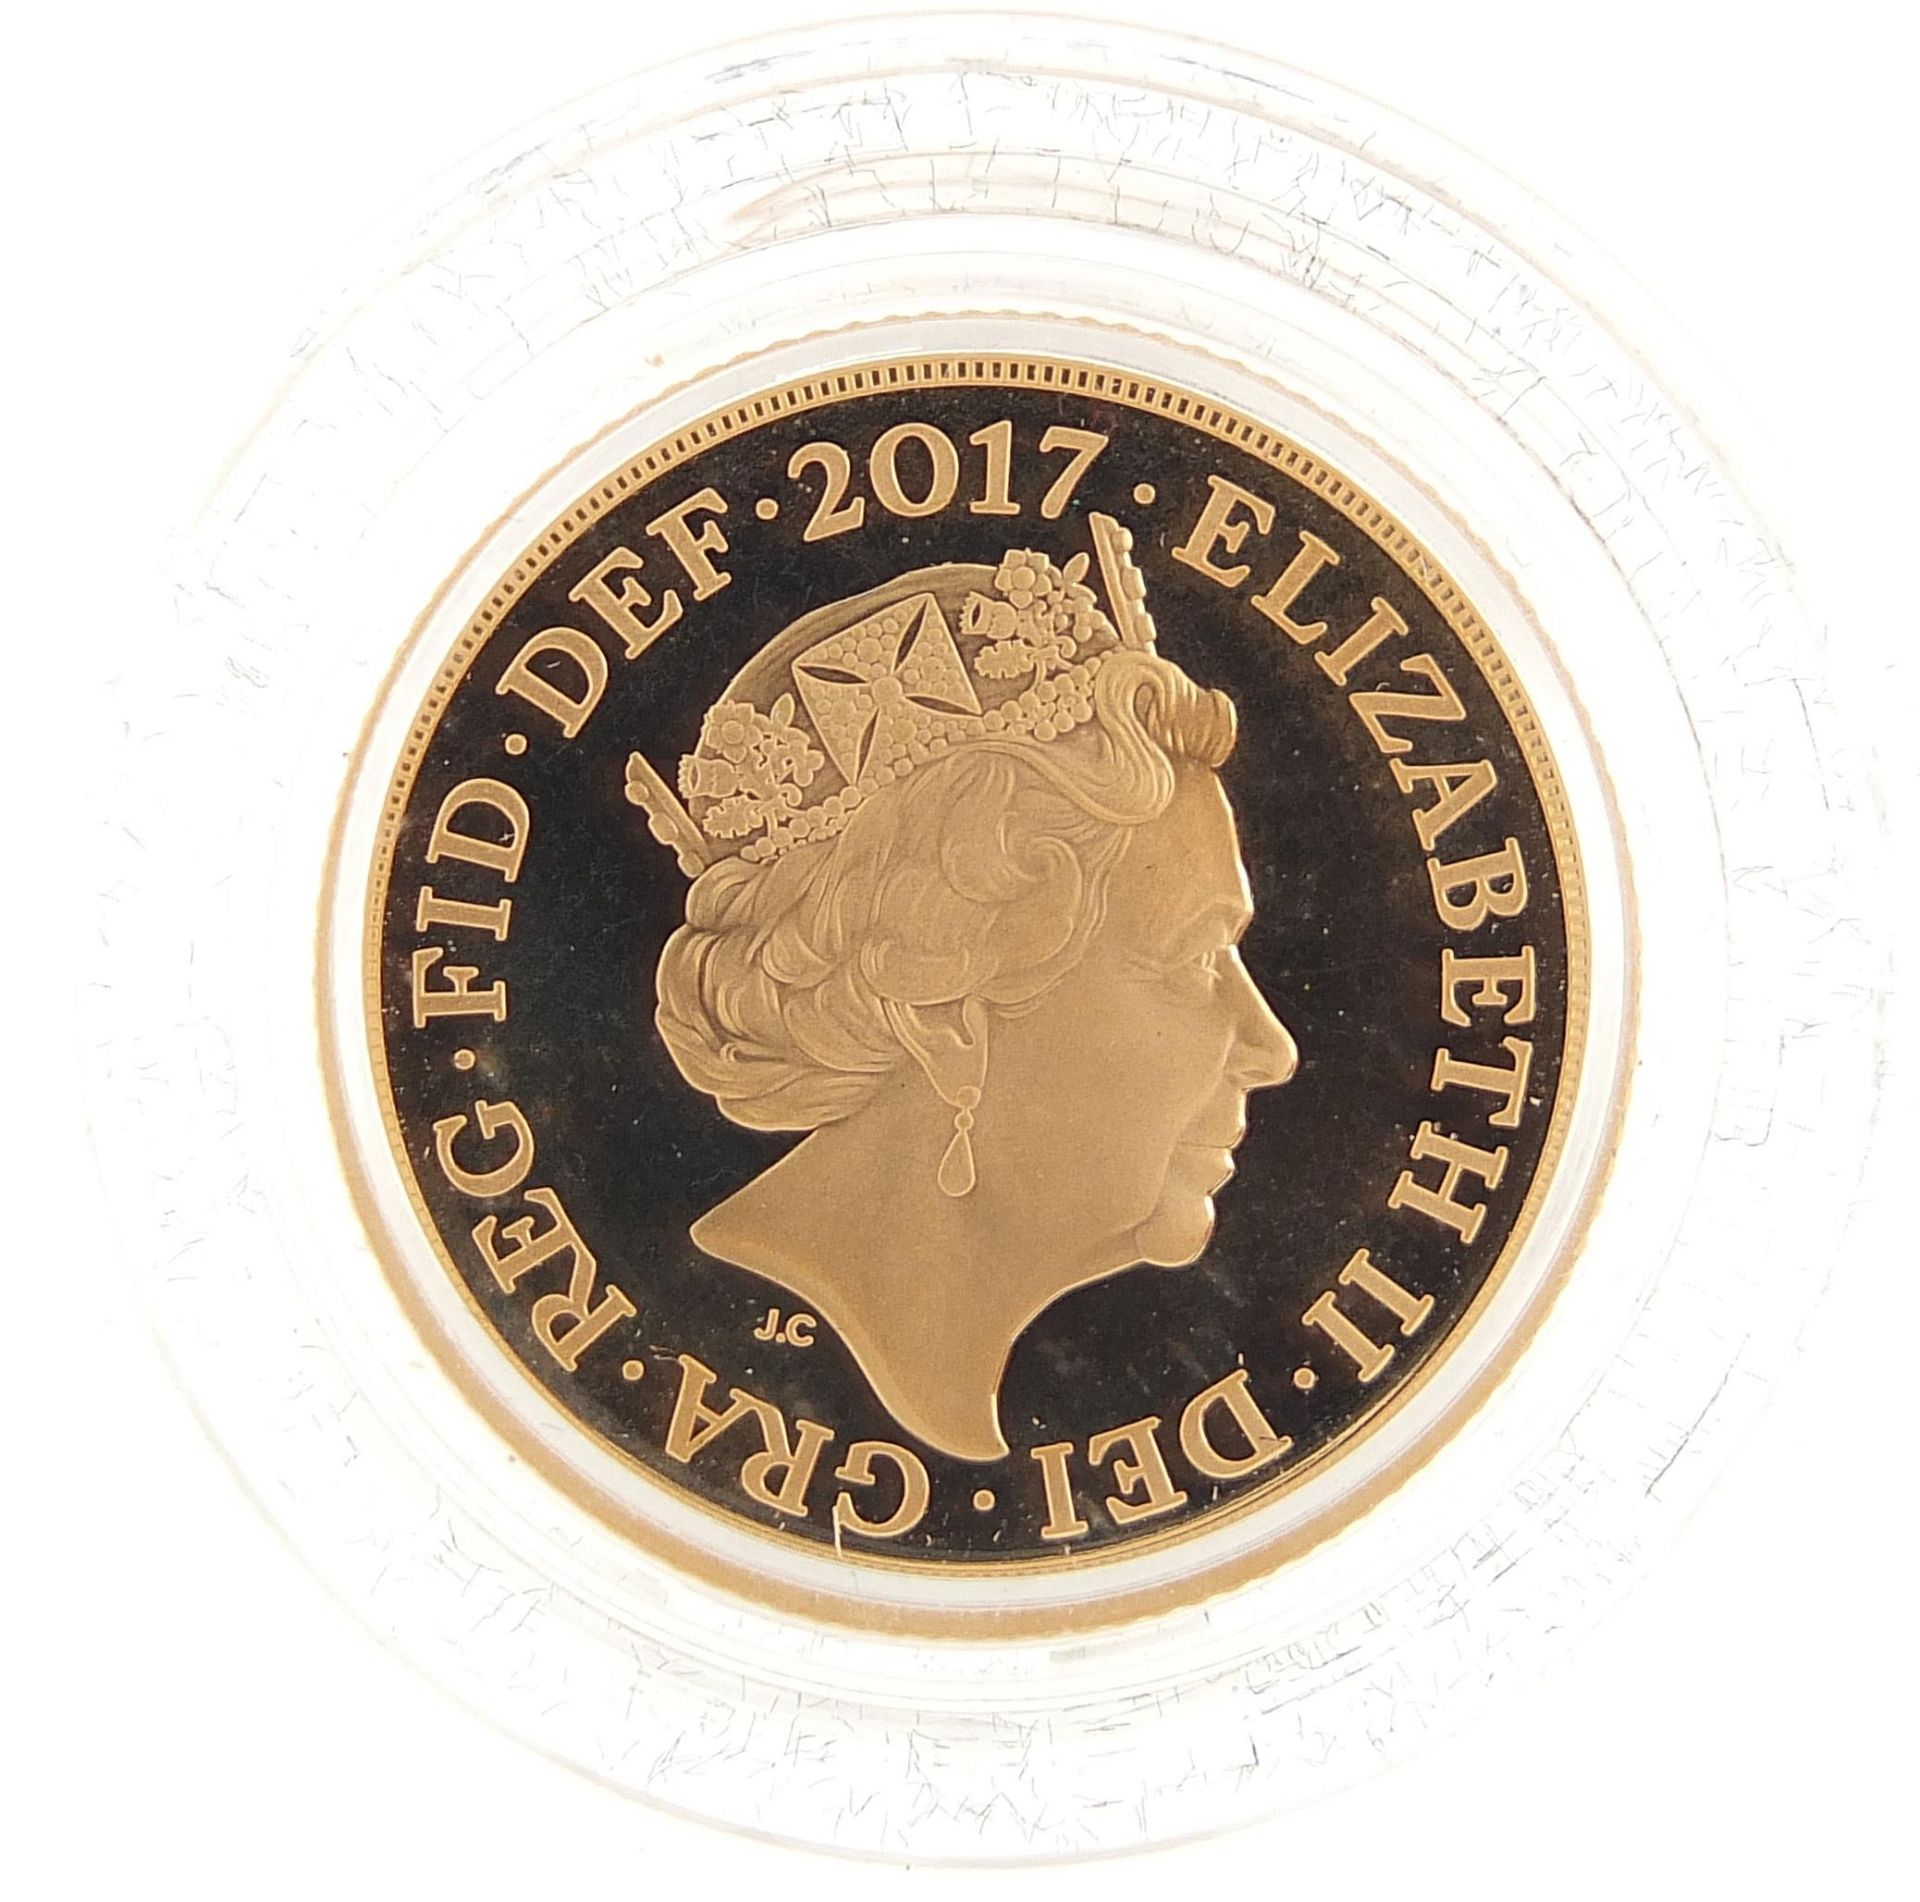 Elizabeth II 2017 gold proof piedfort sovereign with box and certificate, 1554/3500 - this lot is - Image 3 of 4